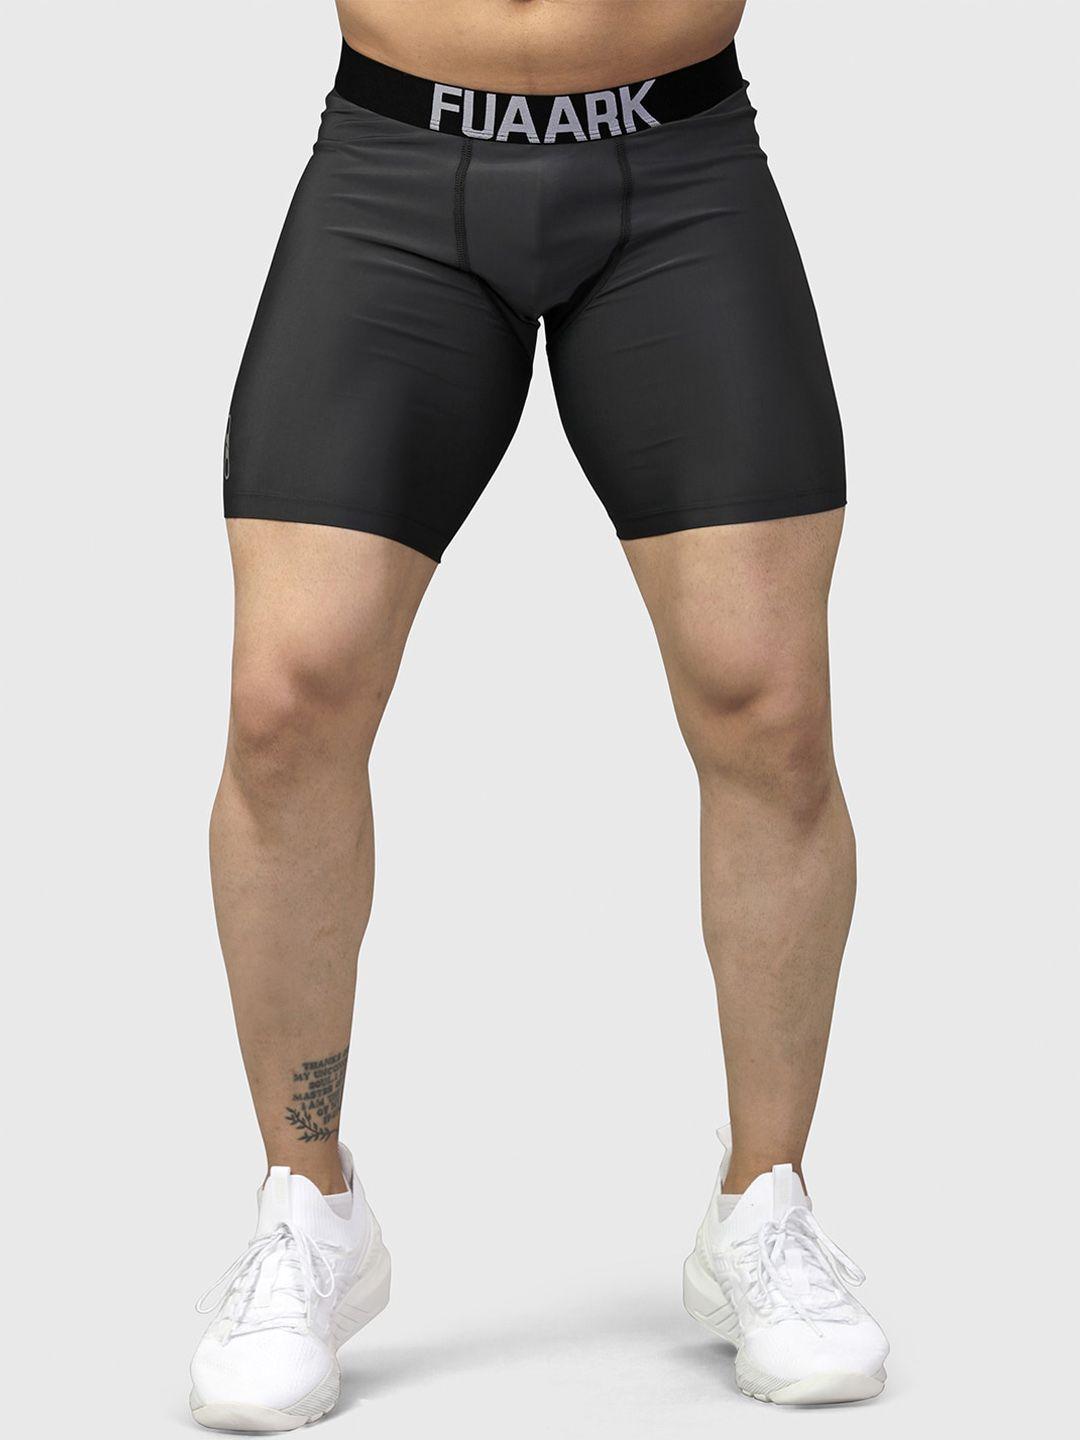 fuaark men skinny fit training or gym rapid-dry sports shorts